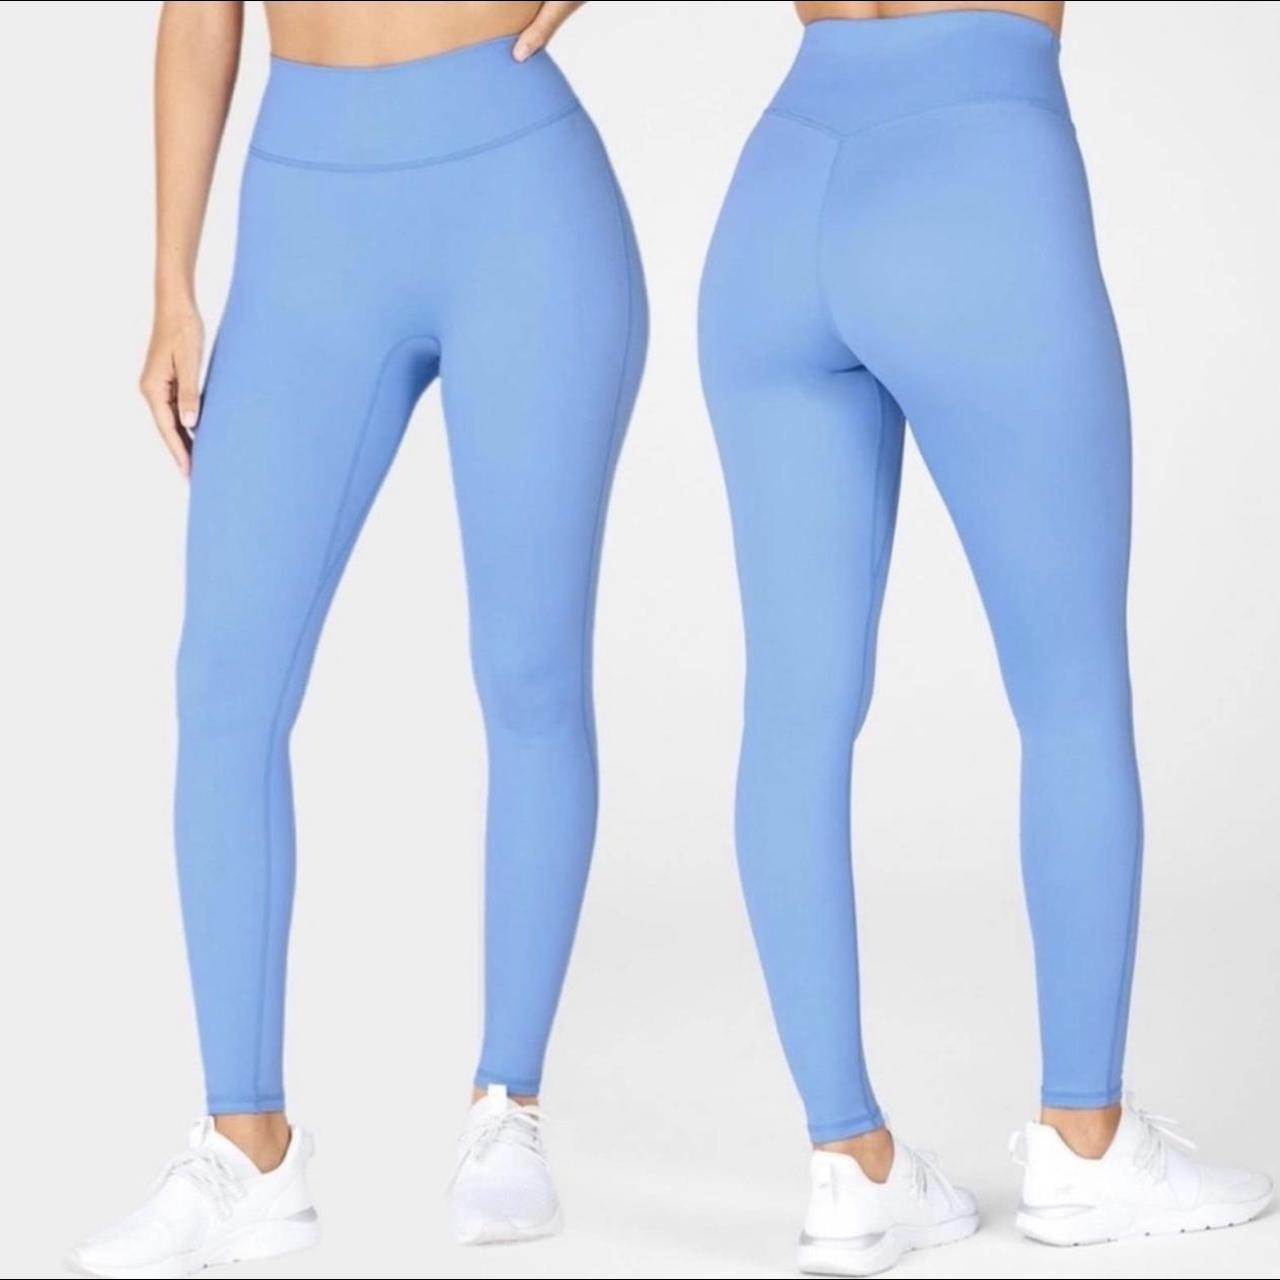 Motion 365 Fabletics baby blue leggings without - Depop